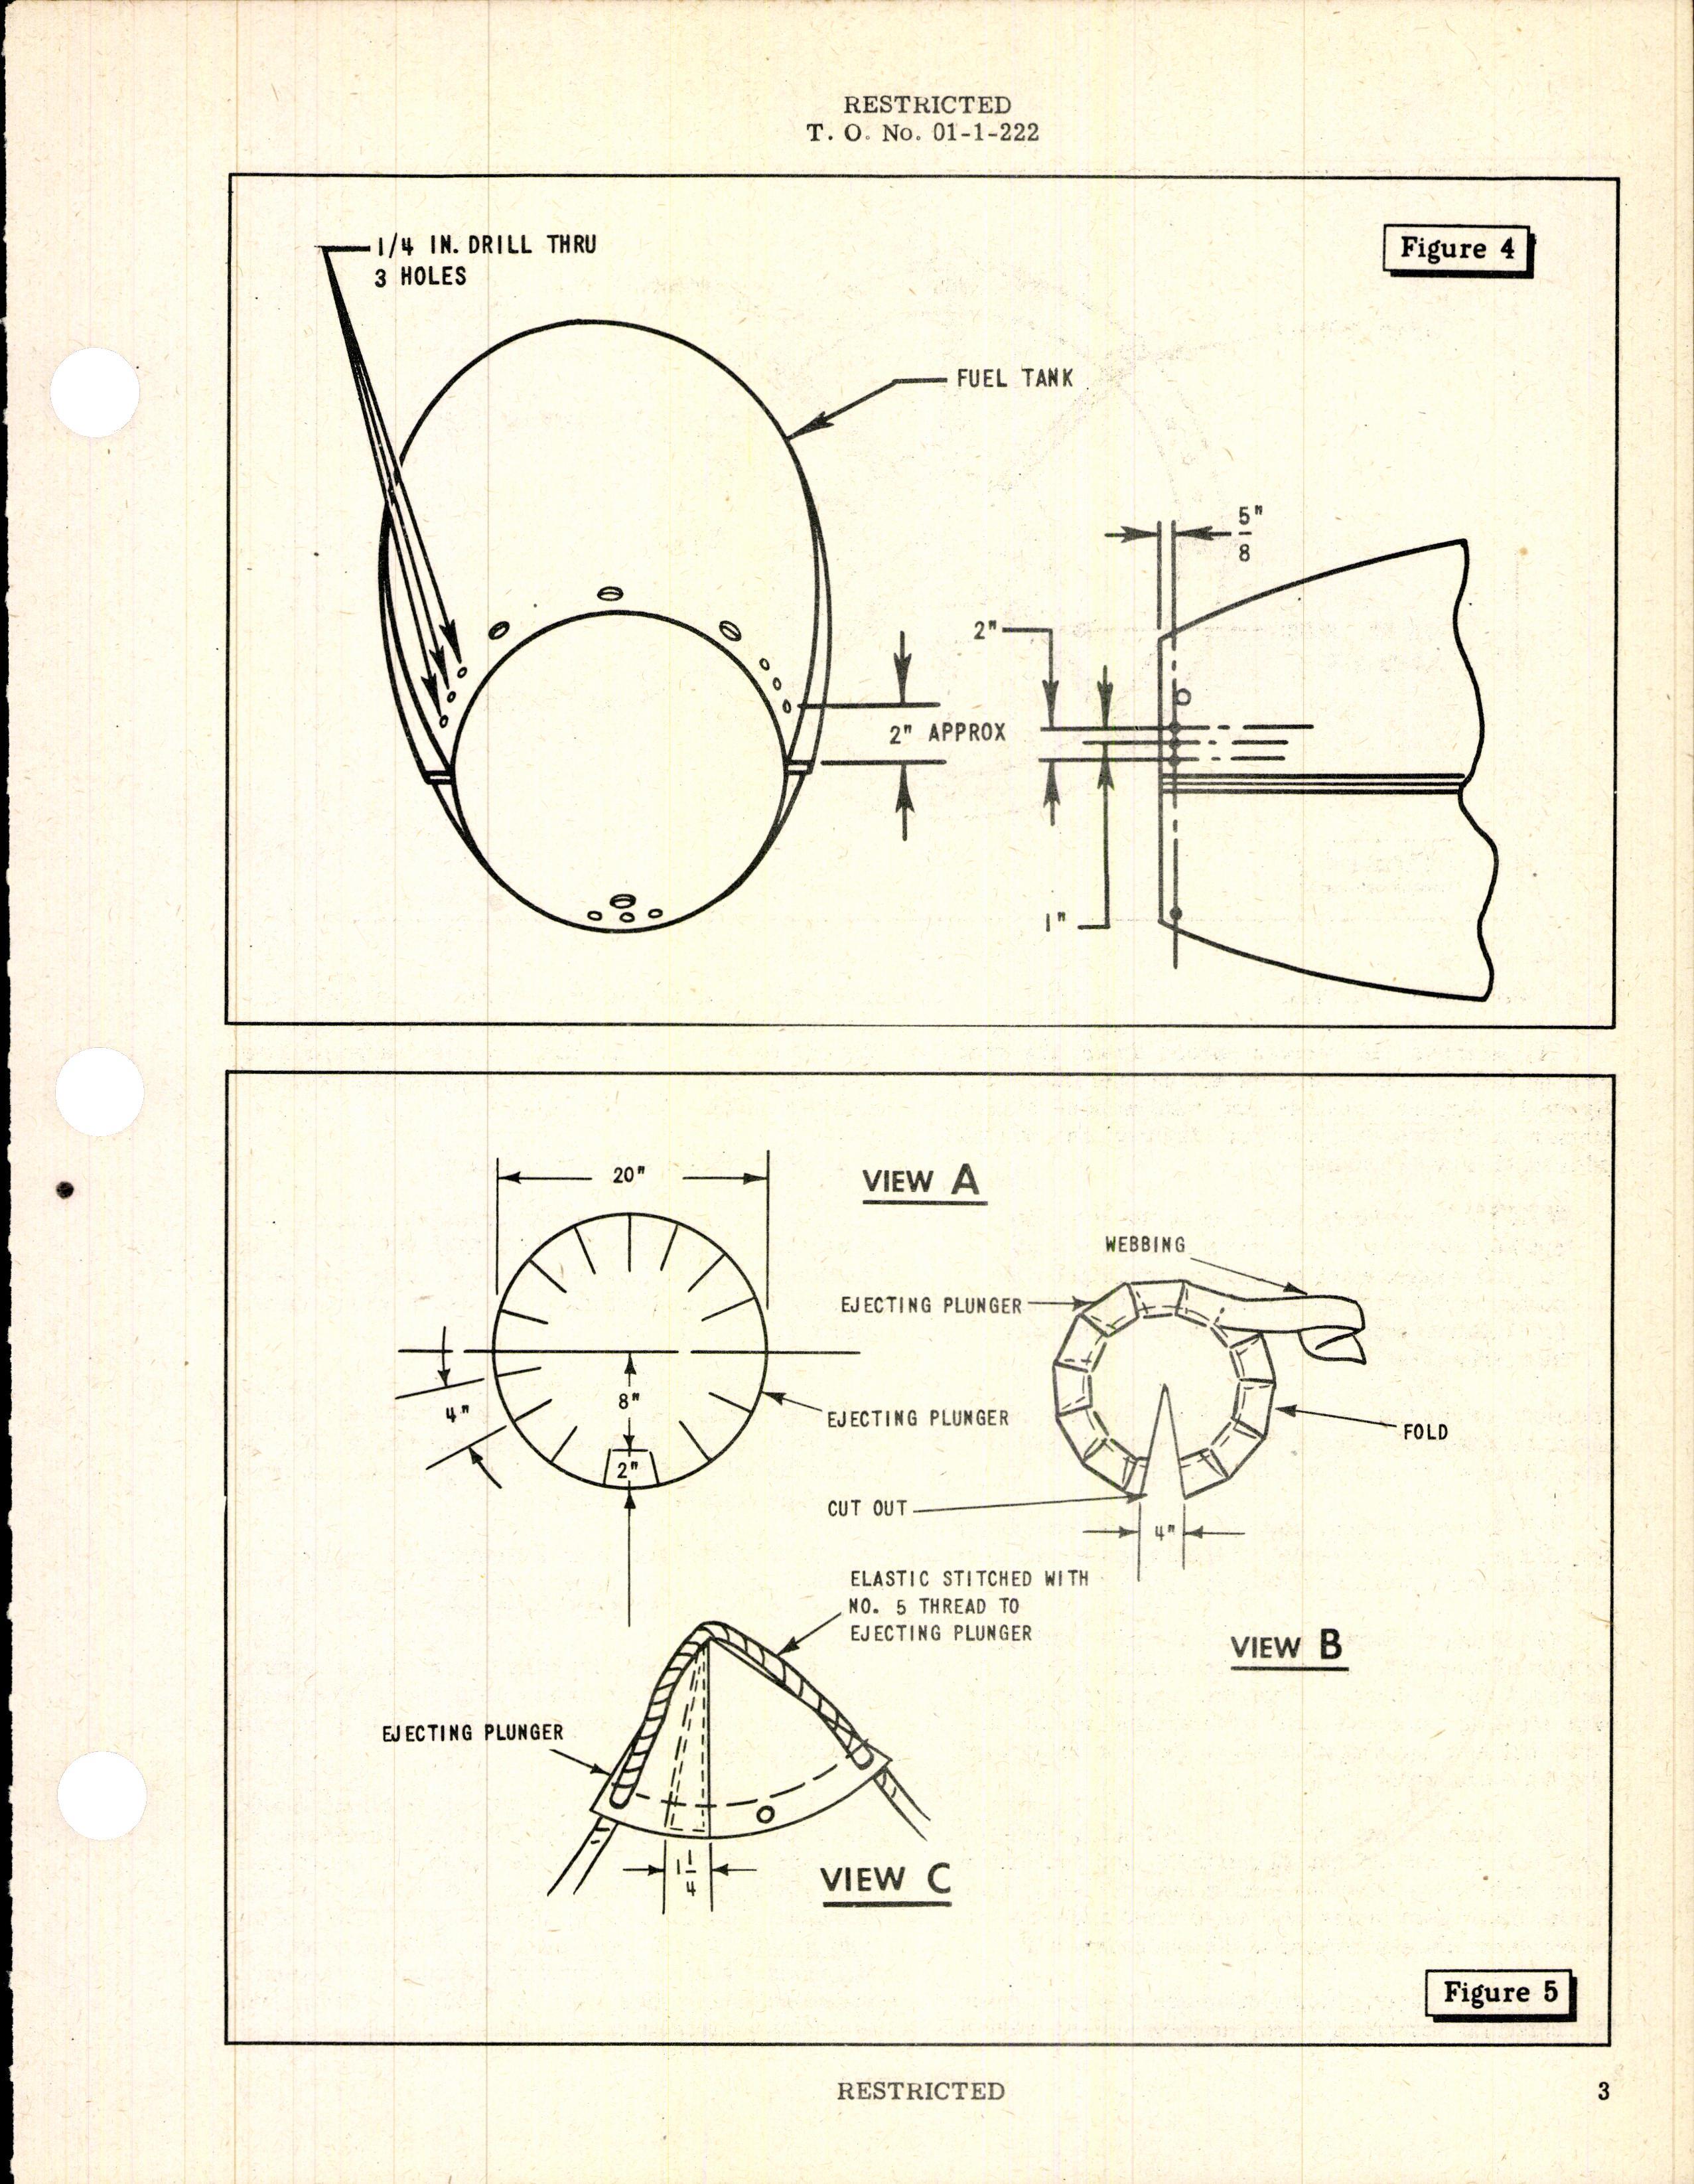 Sample page 3 from AirCorps Library document: Conversion of 75 Gallon Auxiliary Metal Fuel Tank Into Fighter Rescue Gear